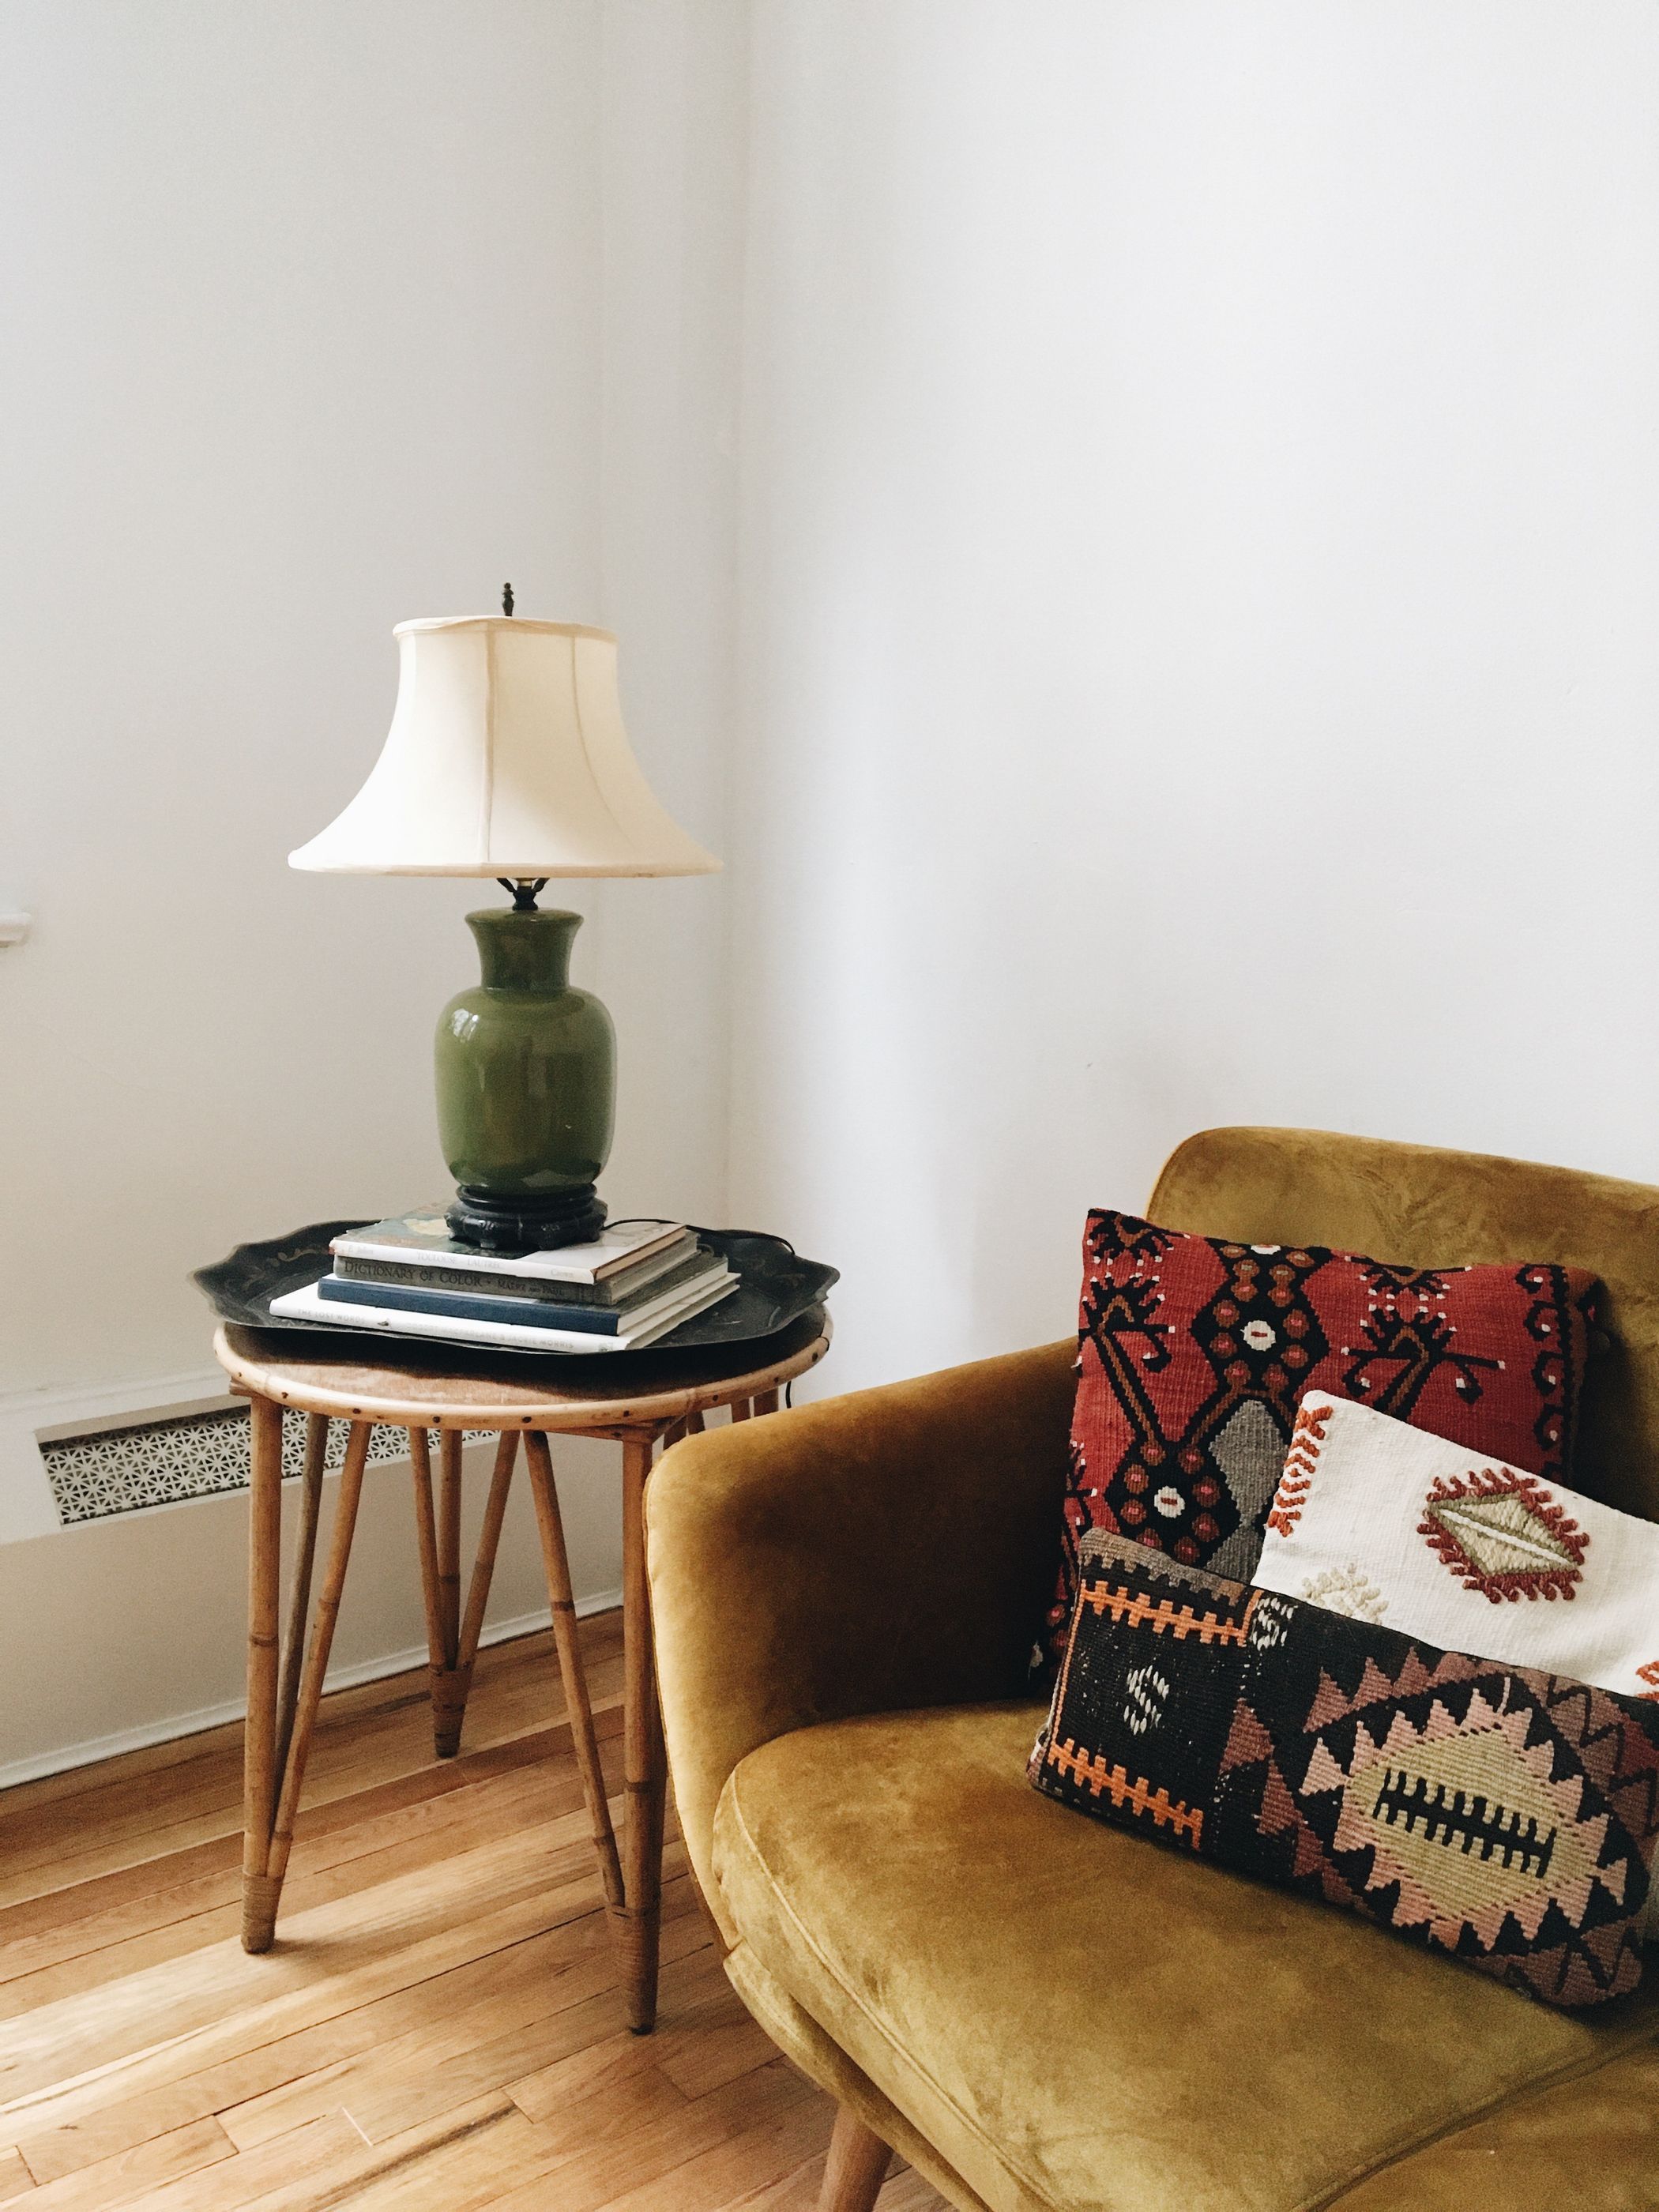 How to Redecorate Your Space Without Spending a Penny